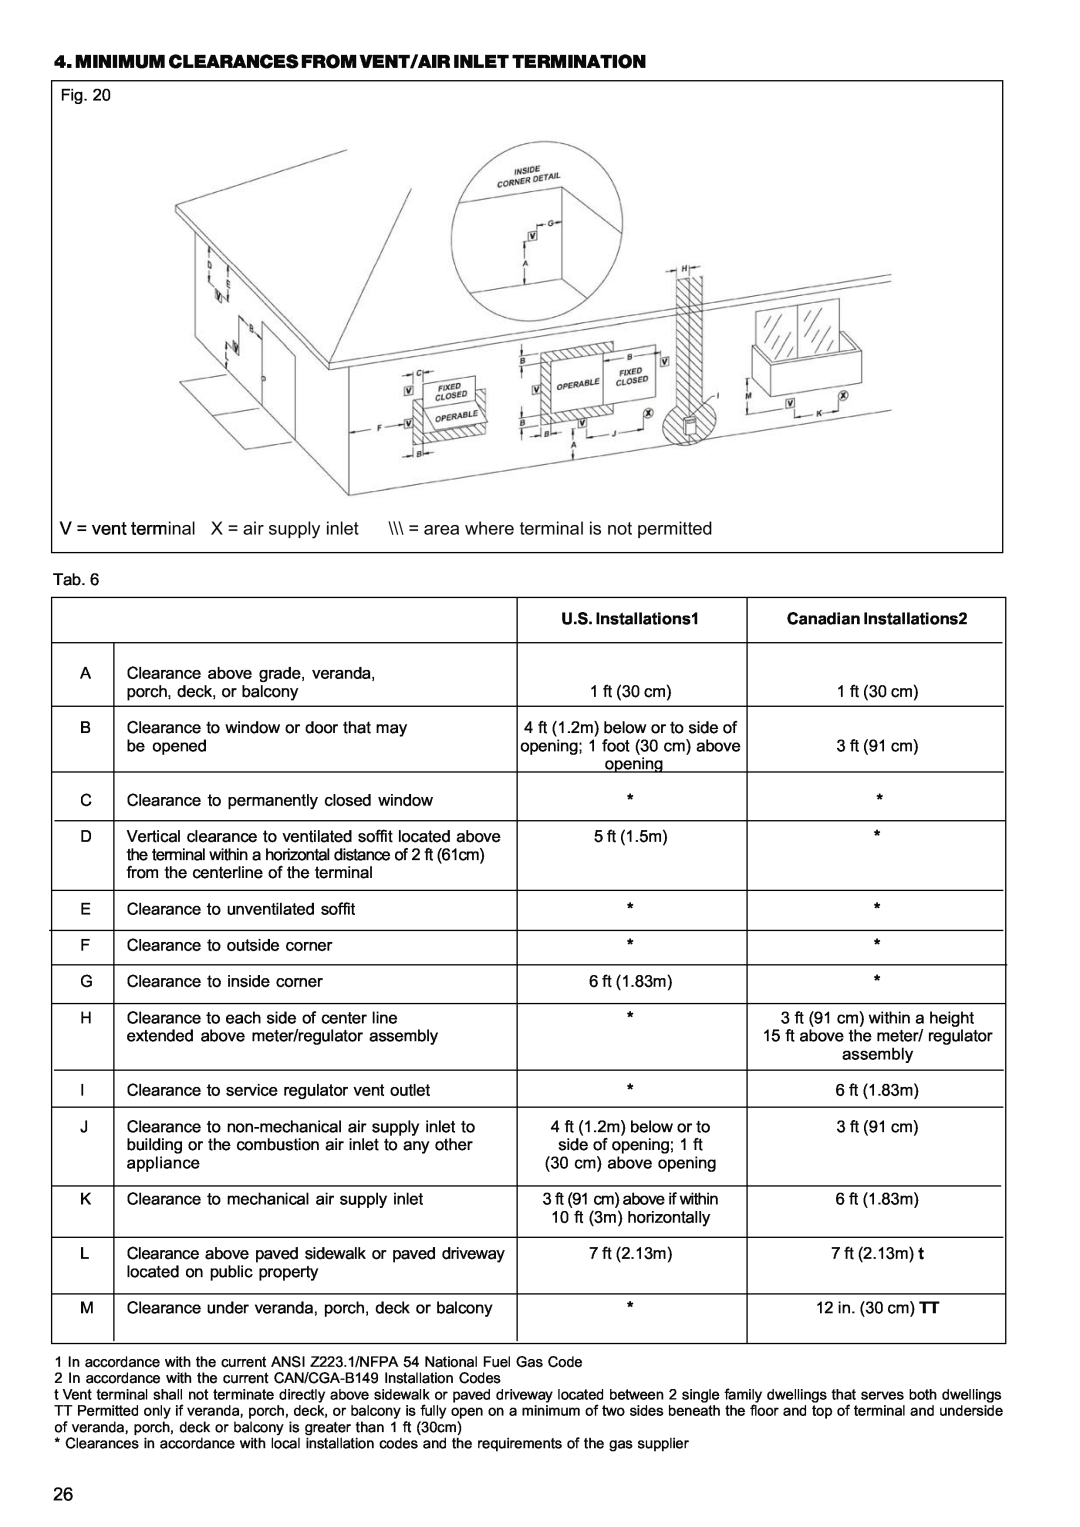 Raypak 85, 120 manual V = vent terminal X = air supply inlet, = area where terminal is not permitted, U.S. Installations1 